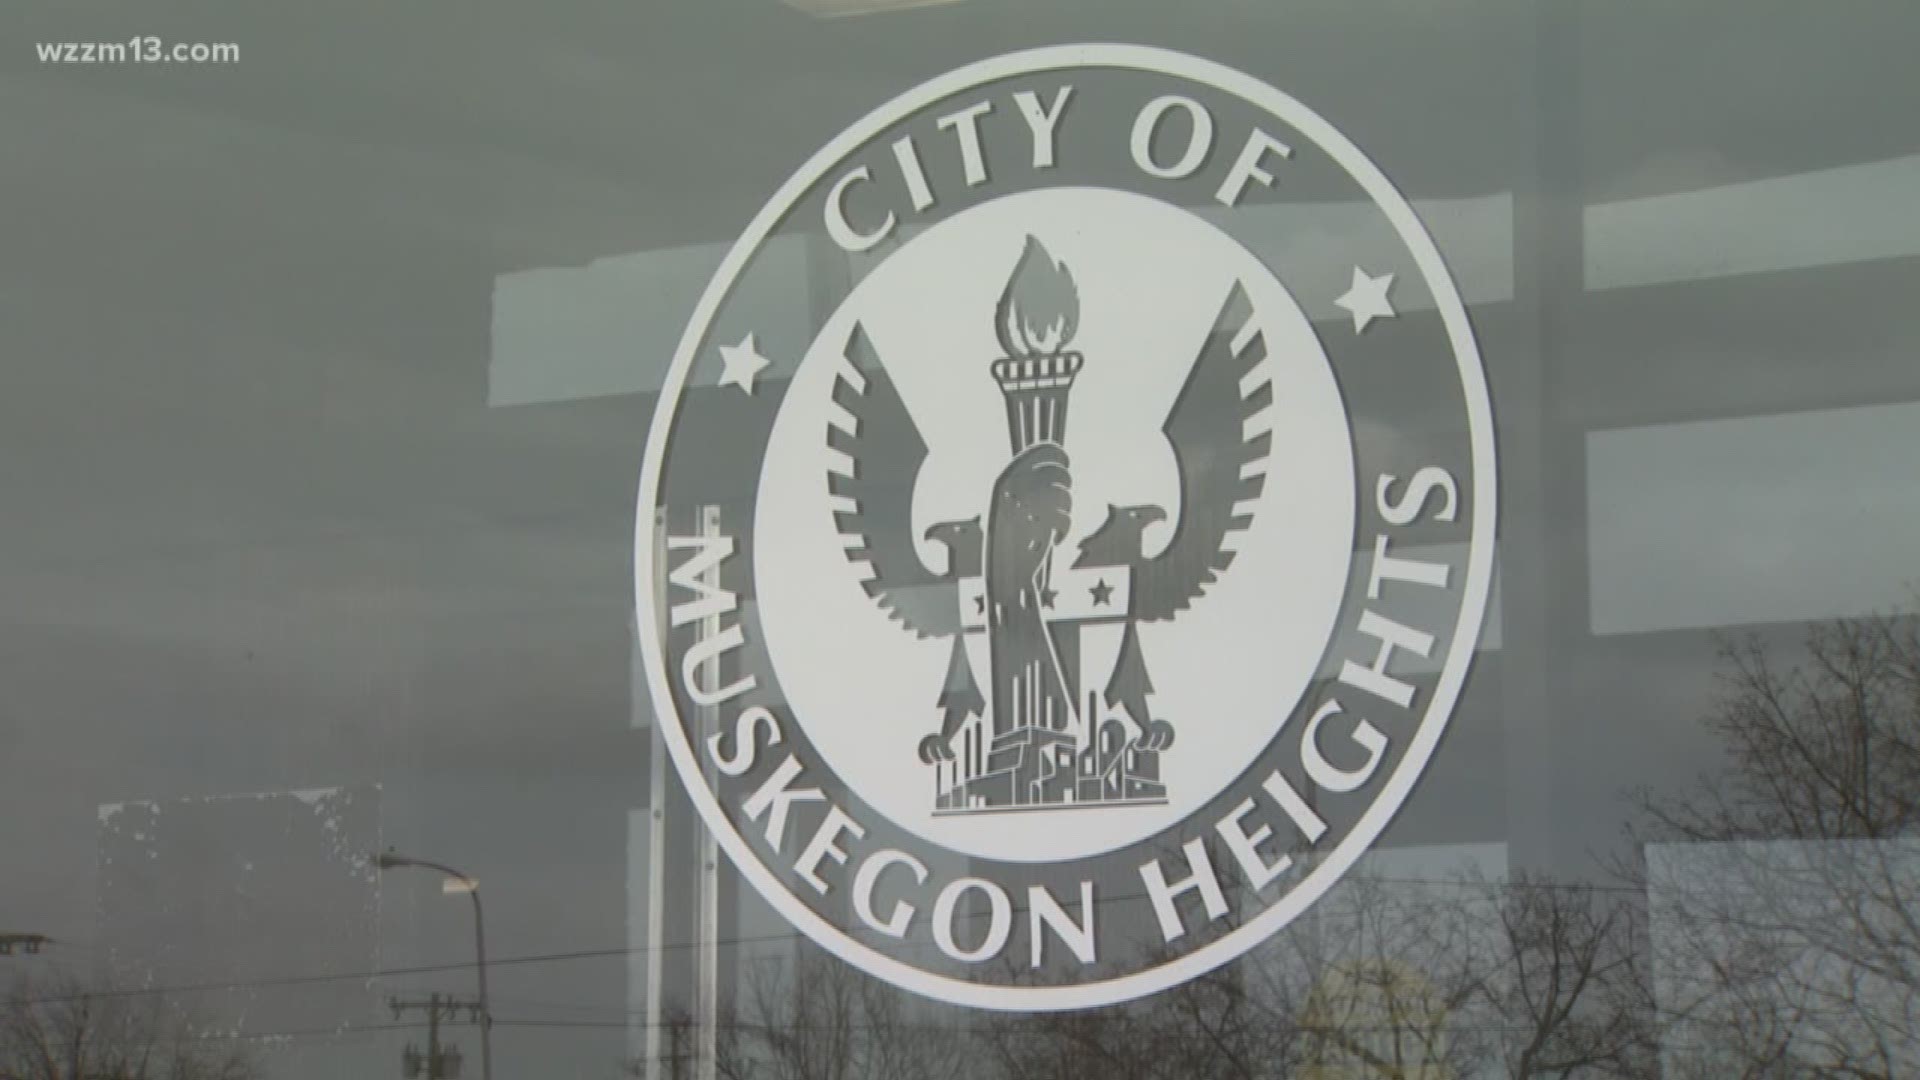 The City of Muskegon Heights is holding a community meeting to learn what people envision in the next city manager.